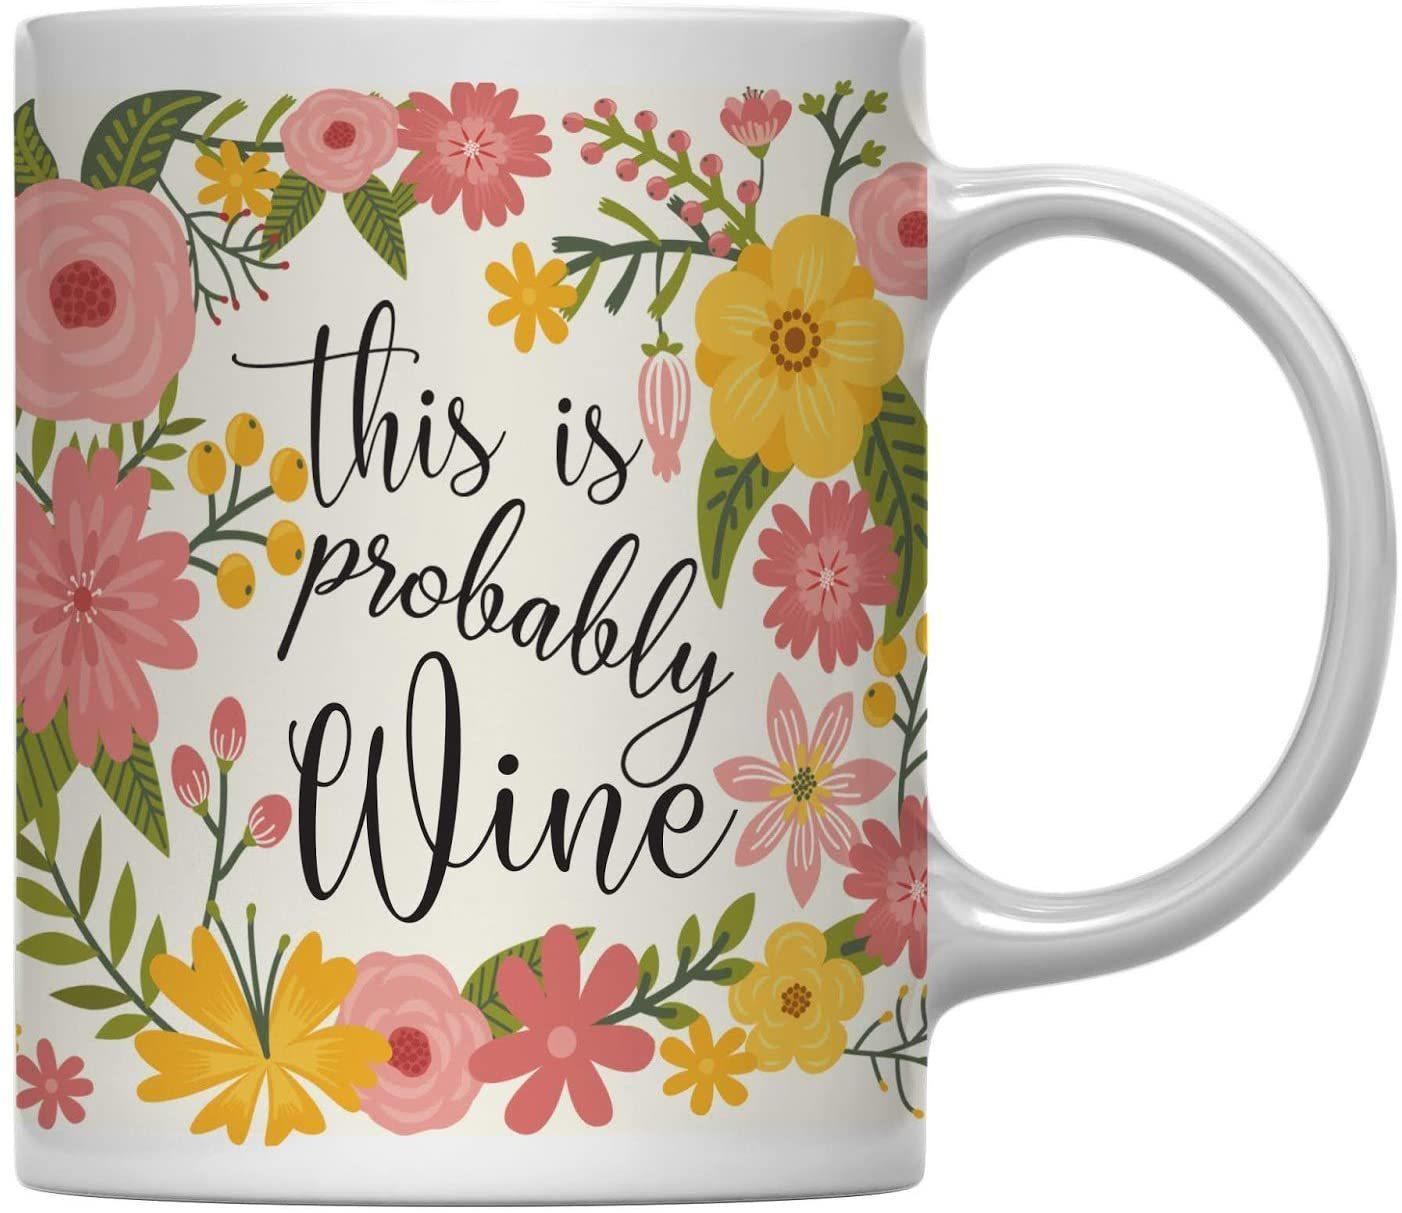 Floral Flowers with Funny Rude Quote Ceramic Coffee Mug-Set of 1-Andaz Press-Do Epic Shit-